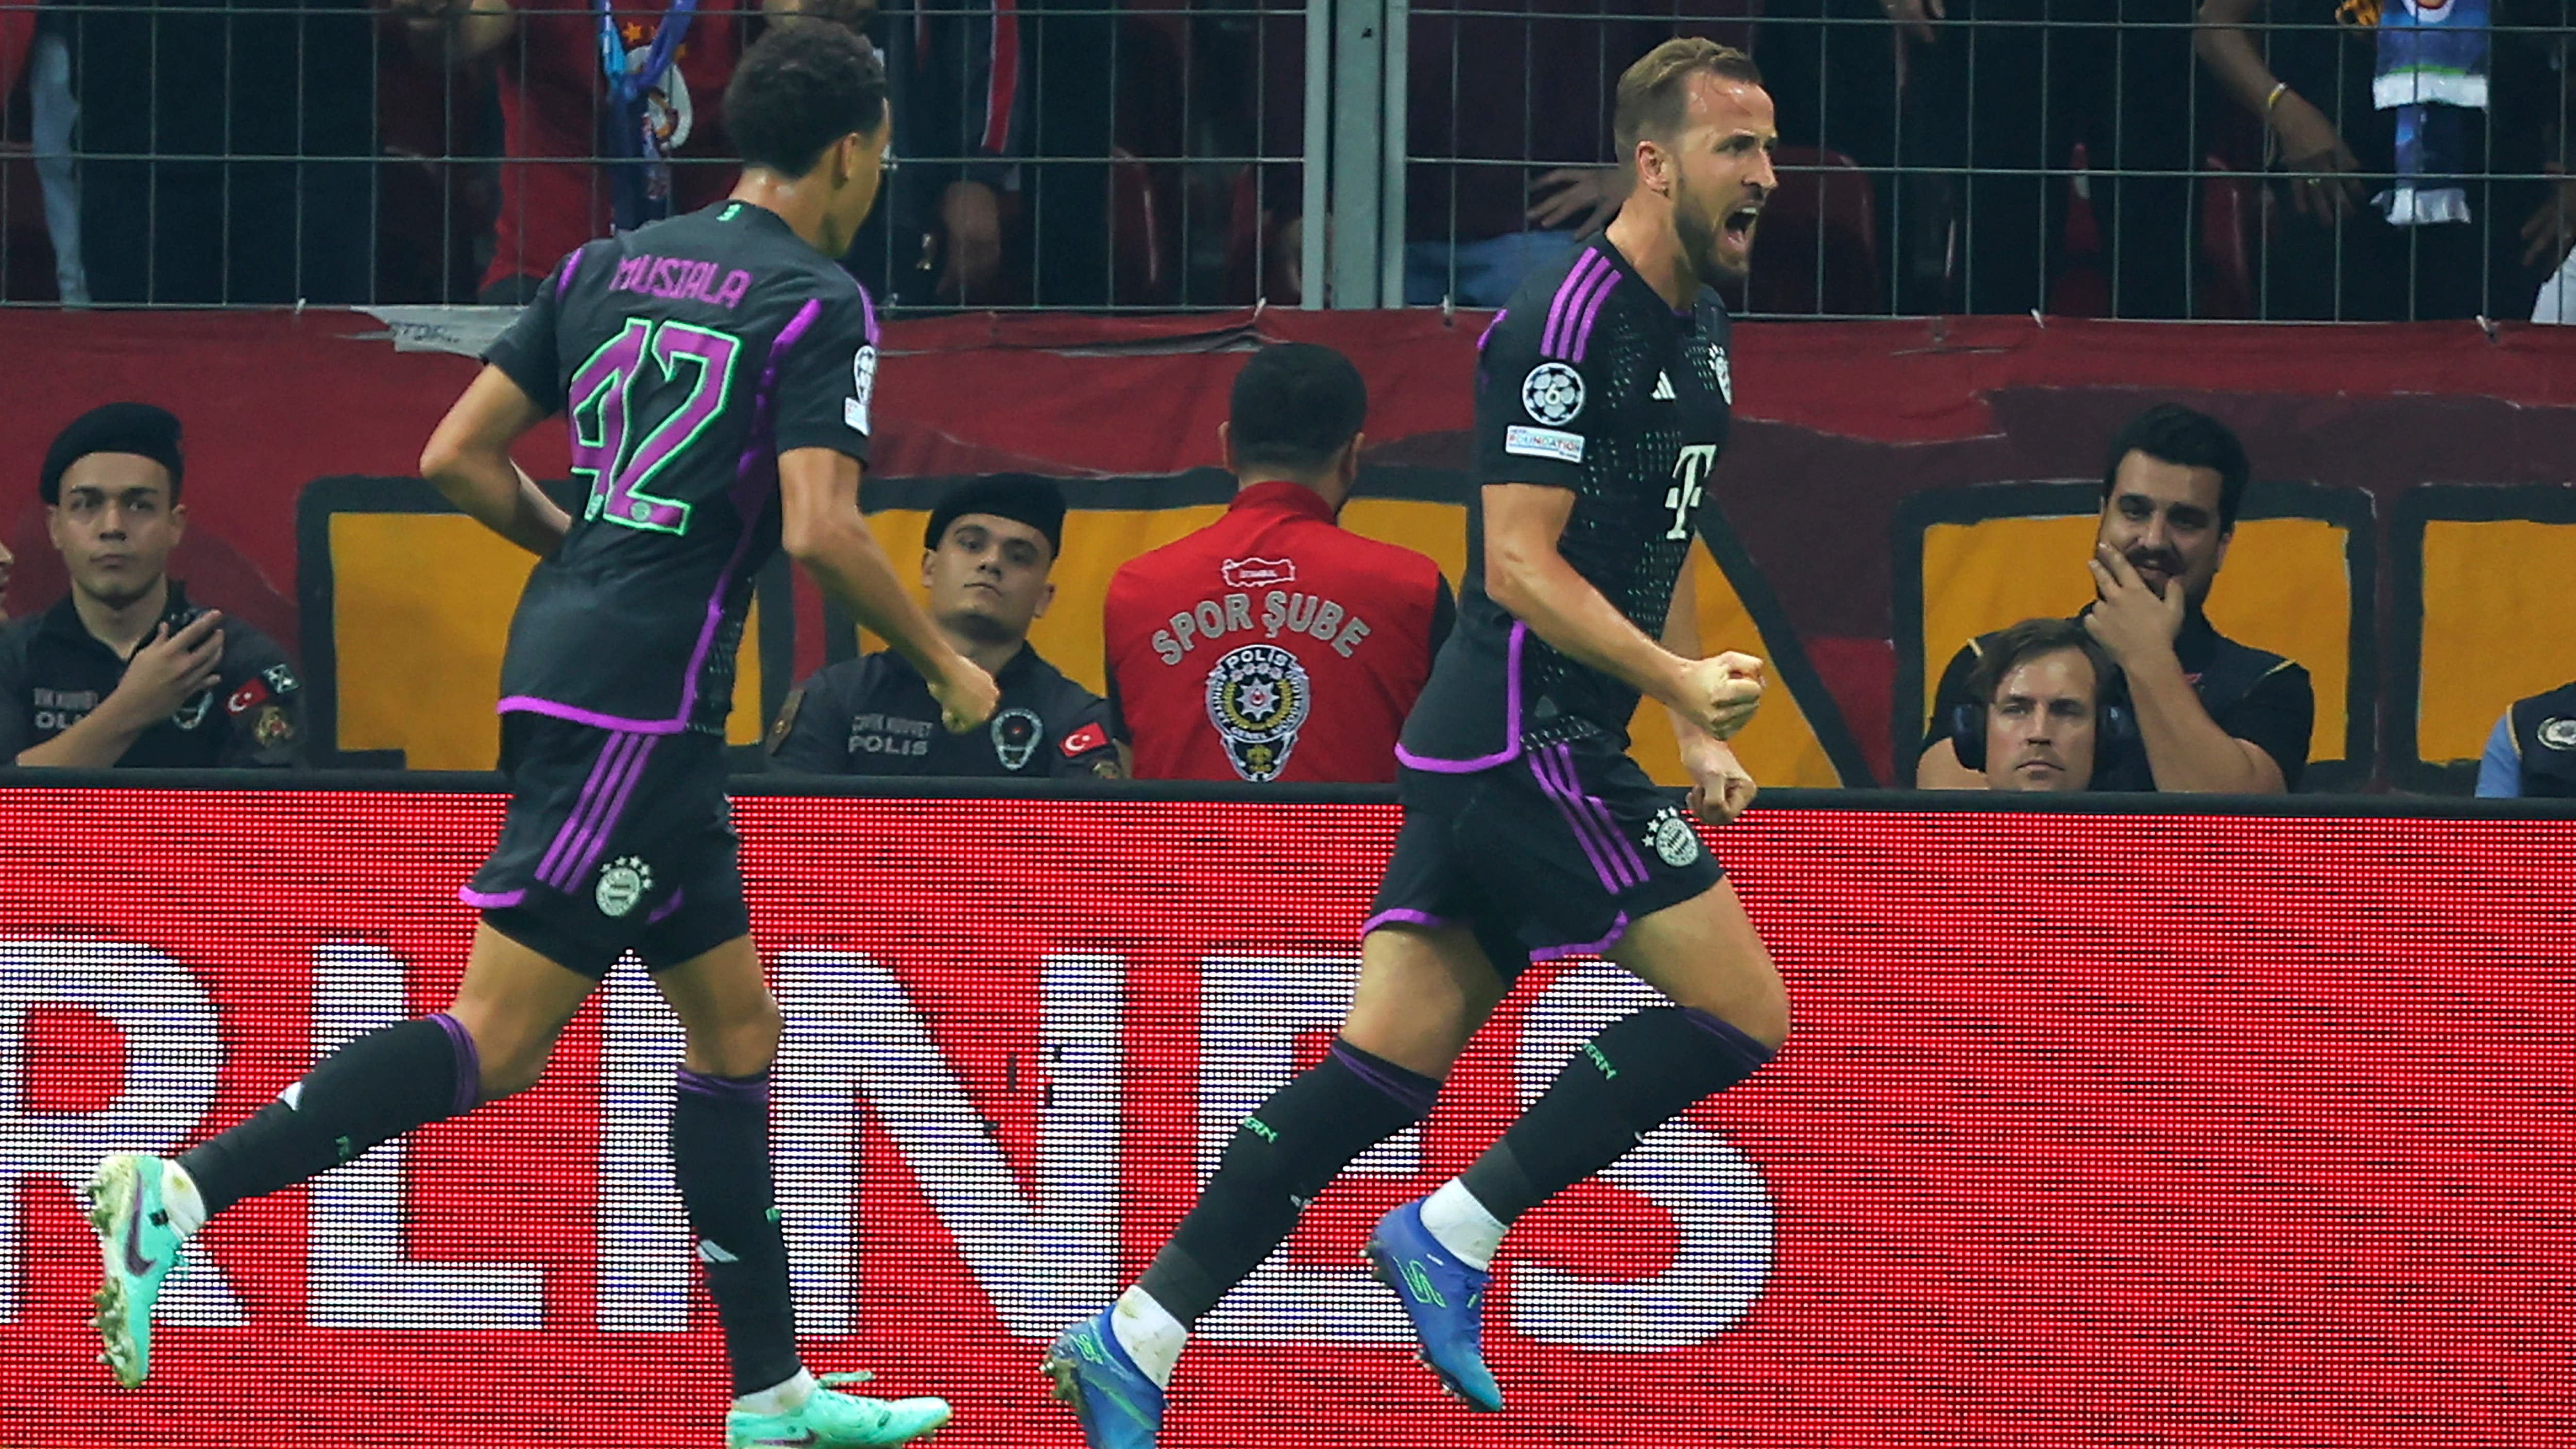 Harry Kane helps Bayern Munich to victory over Galatasaray in Champions League